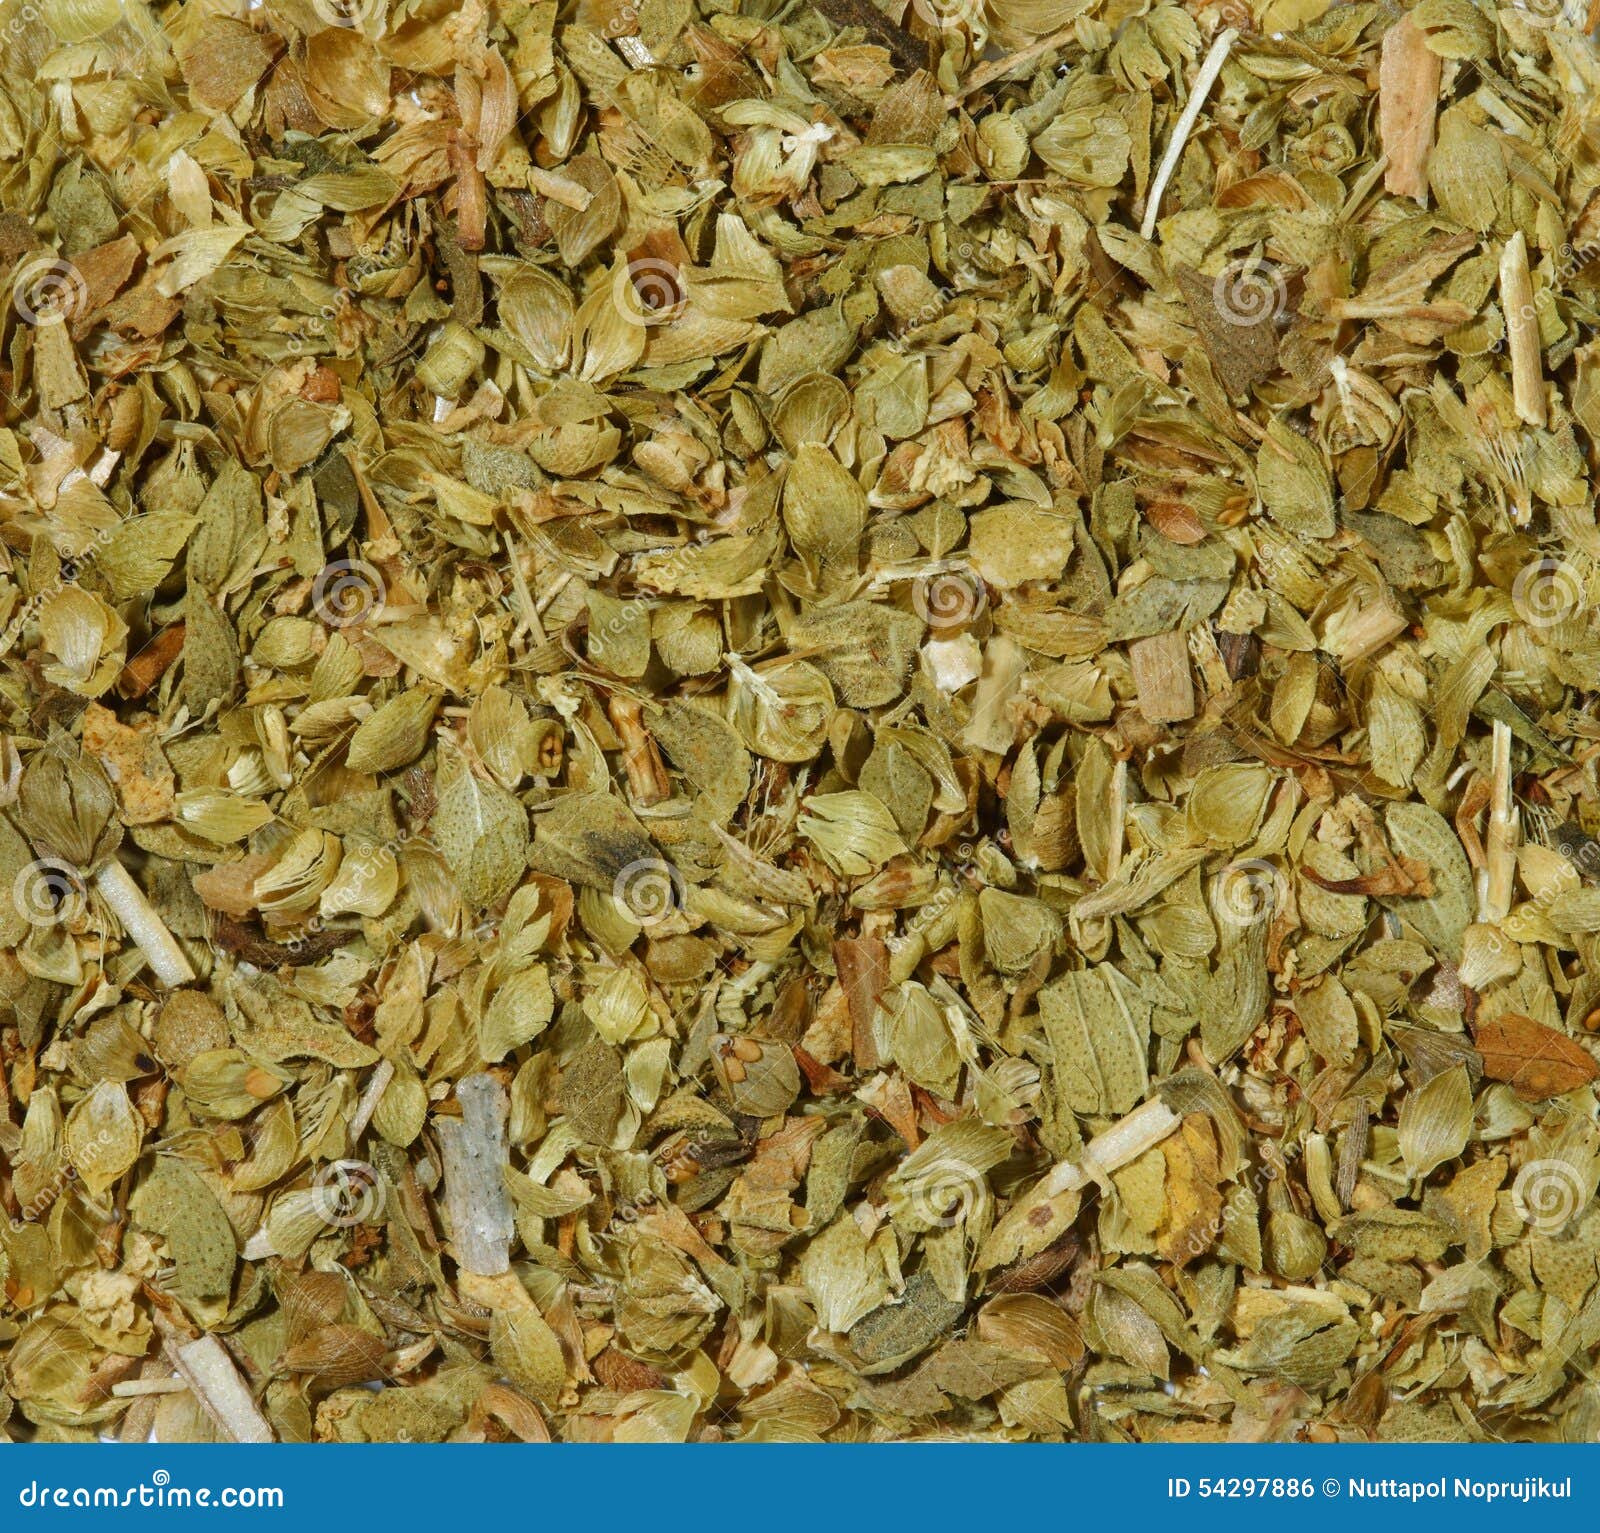 Dried Green Oregano Leaves Background Texture. Stock Photo ...